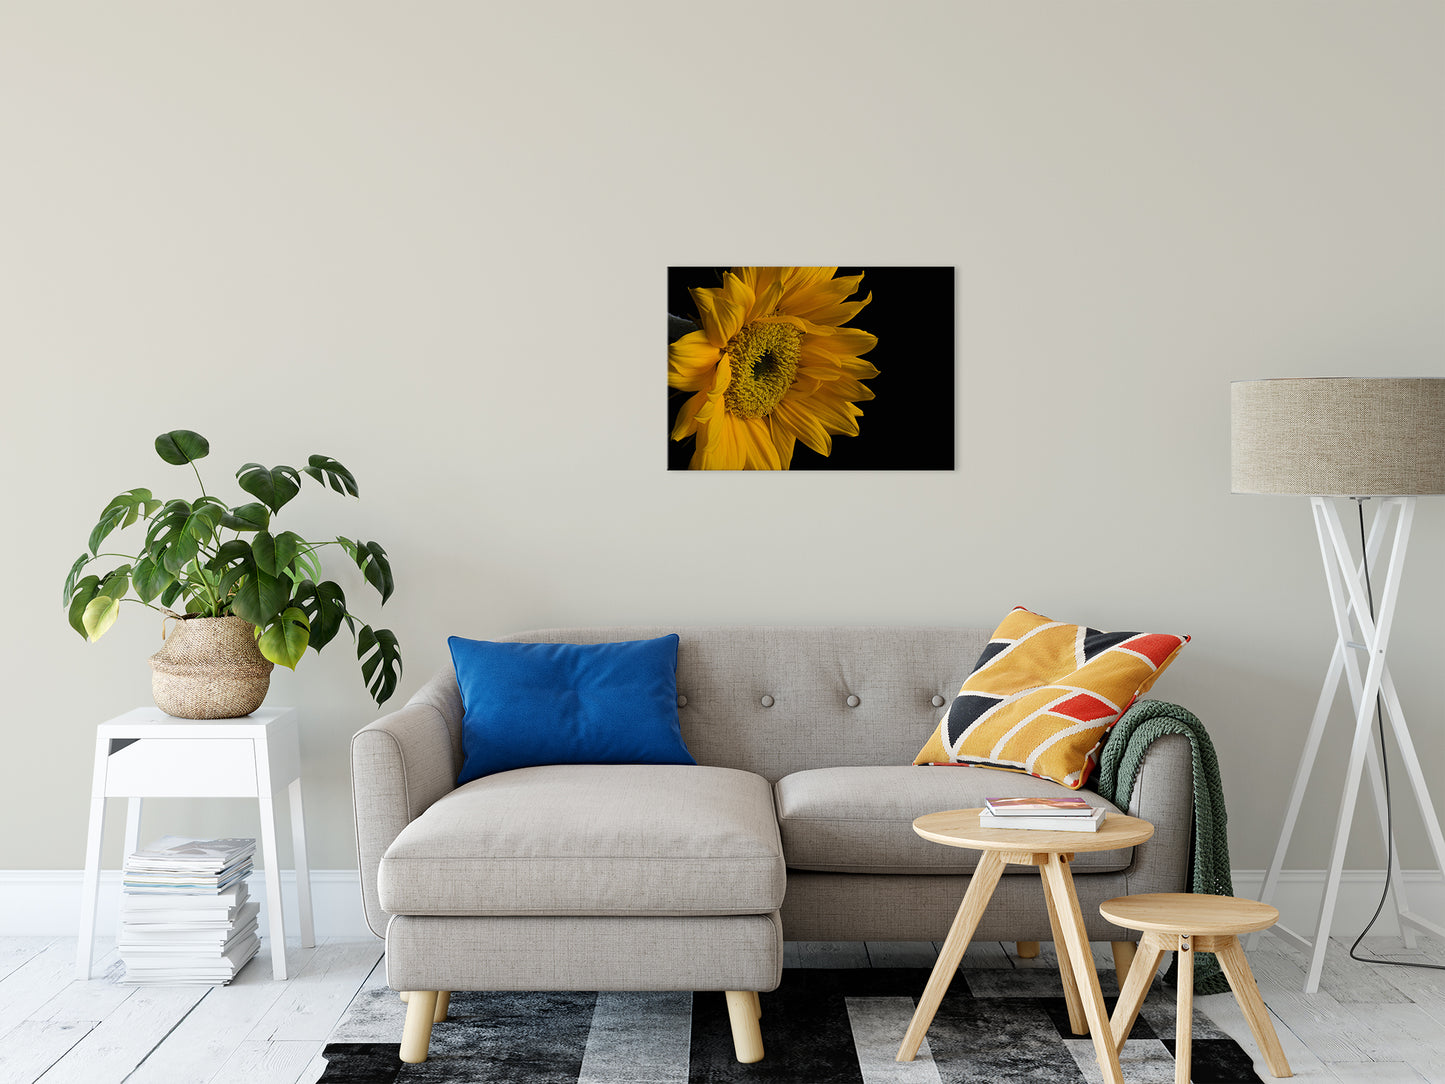 Sunflower from Left Nature / Floral Photo Fine Art Canvas Wall Art Prints 20" x 30" - PIPAFINEART